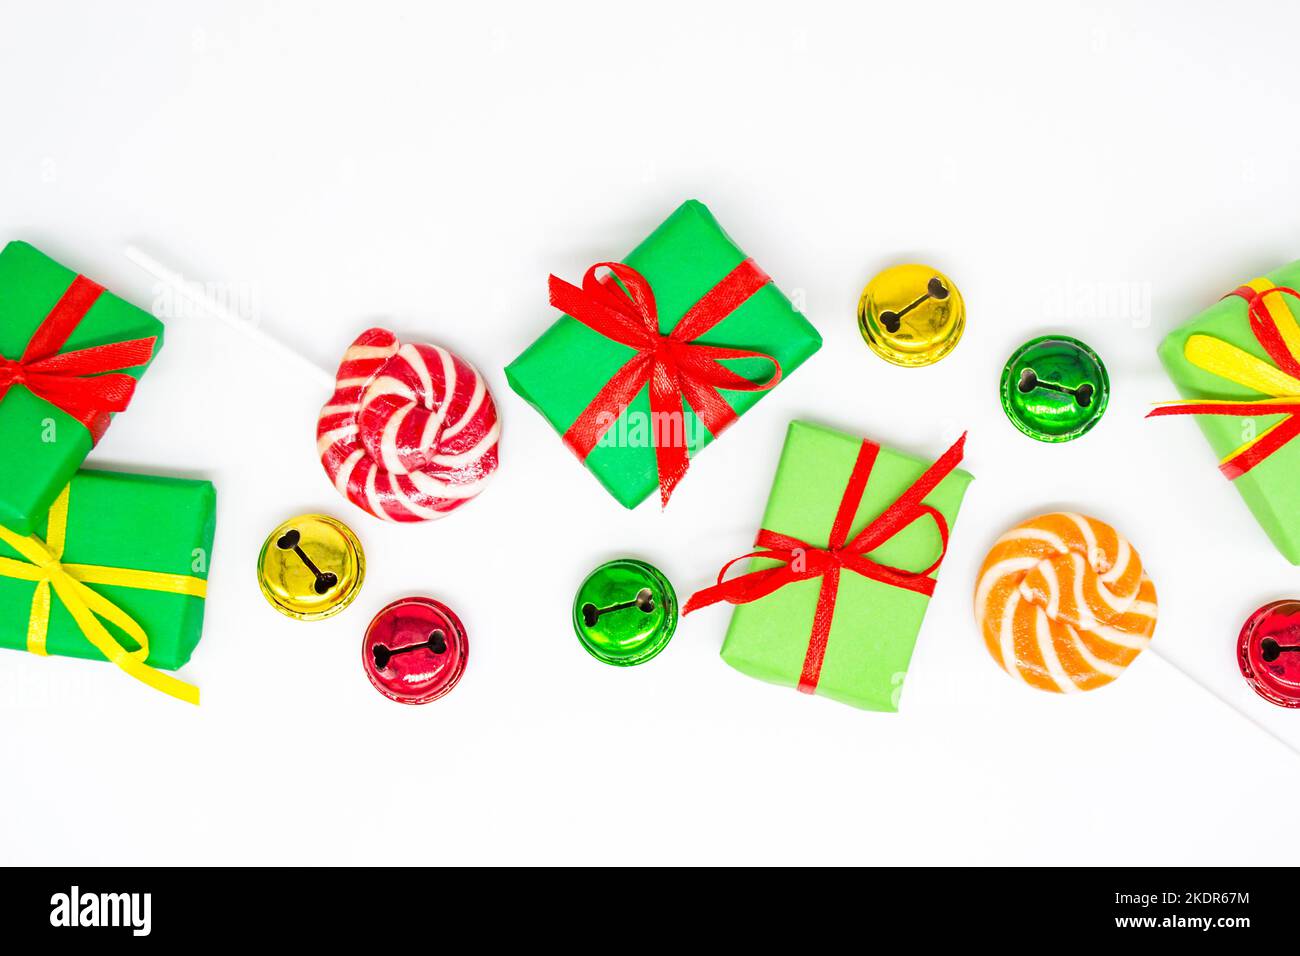 Happy holidays: gifts with lollipops and red, green, golden bells on a white background, copy space. The concept of Christmas, sales, children parties Stock Photo